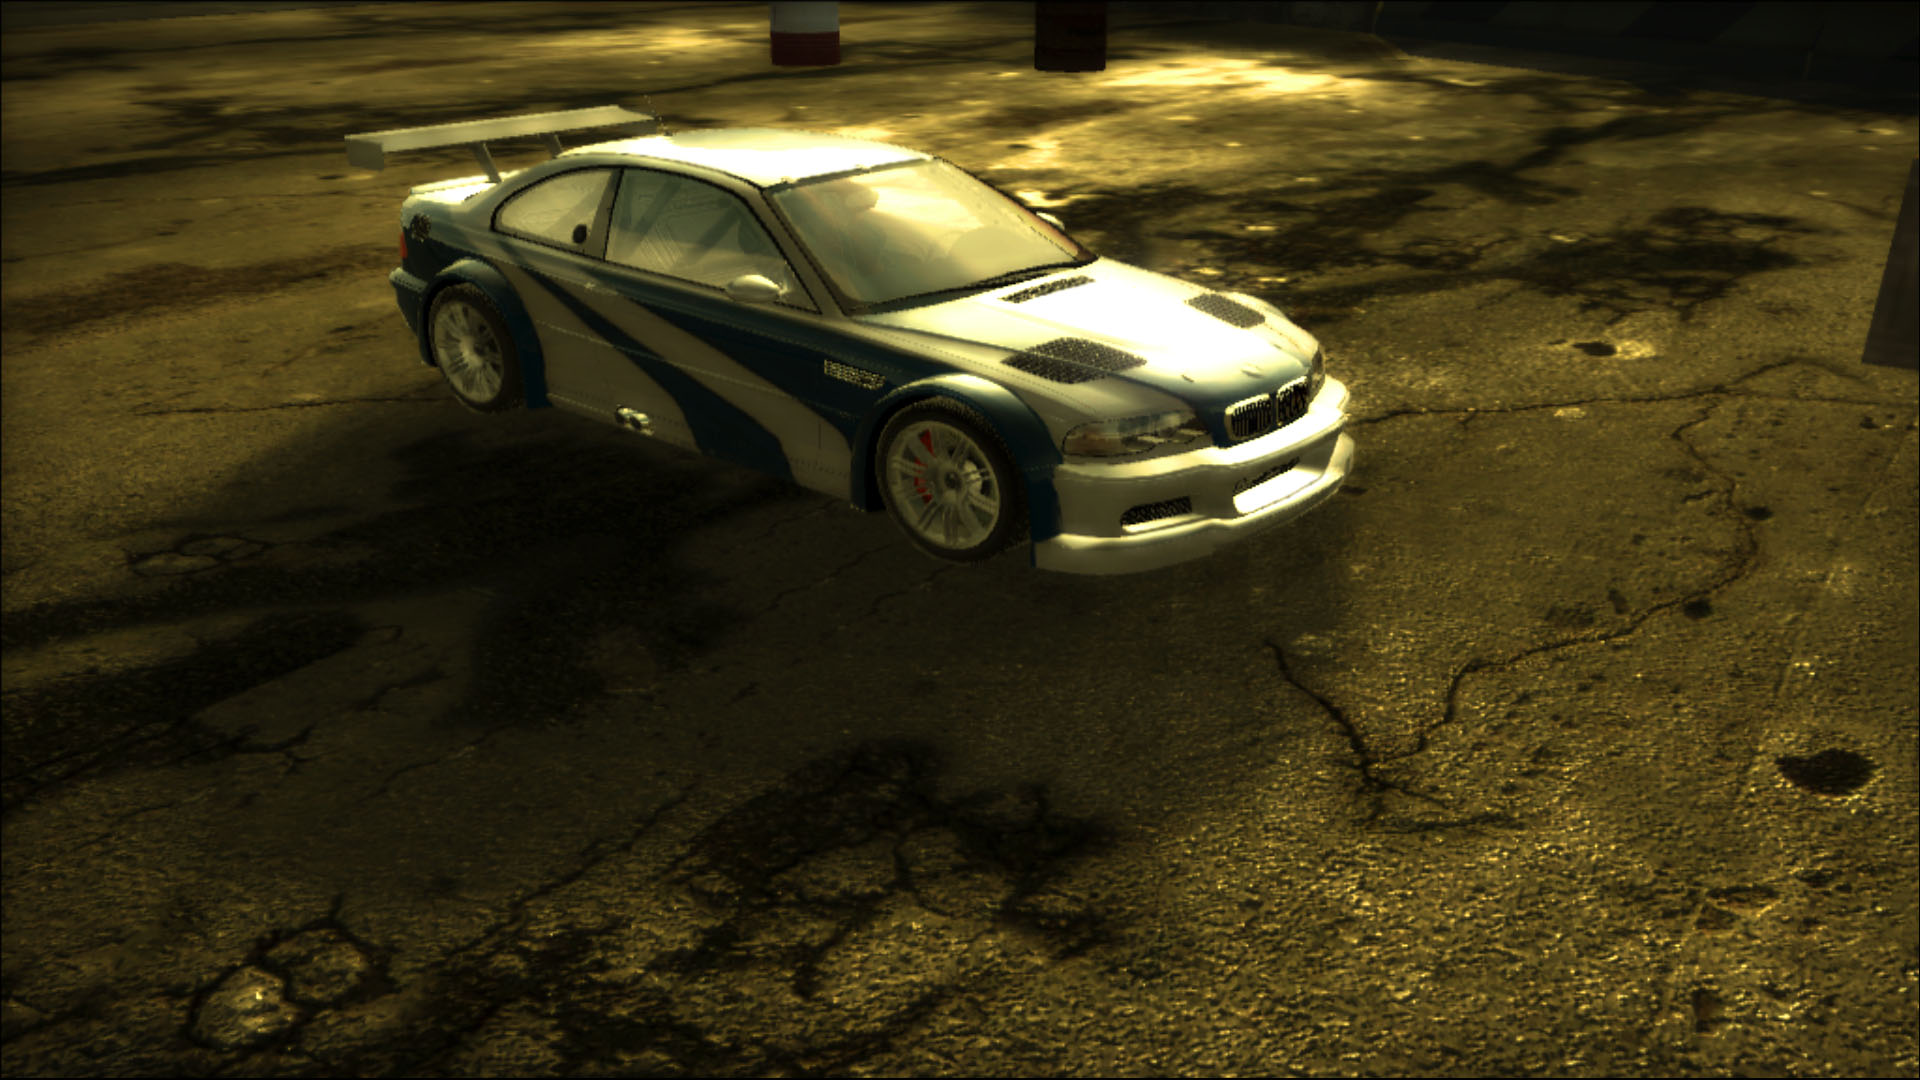 Most wanted shop. NFS most wanted 2005. Нфс мост вантед 2005. NFS most wanted скрин гонка. Need for Speed most wanted 2005 арты.